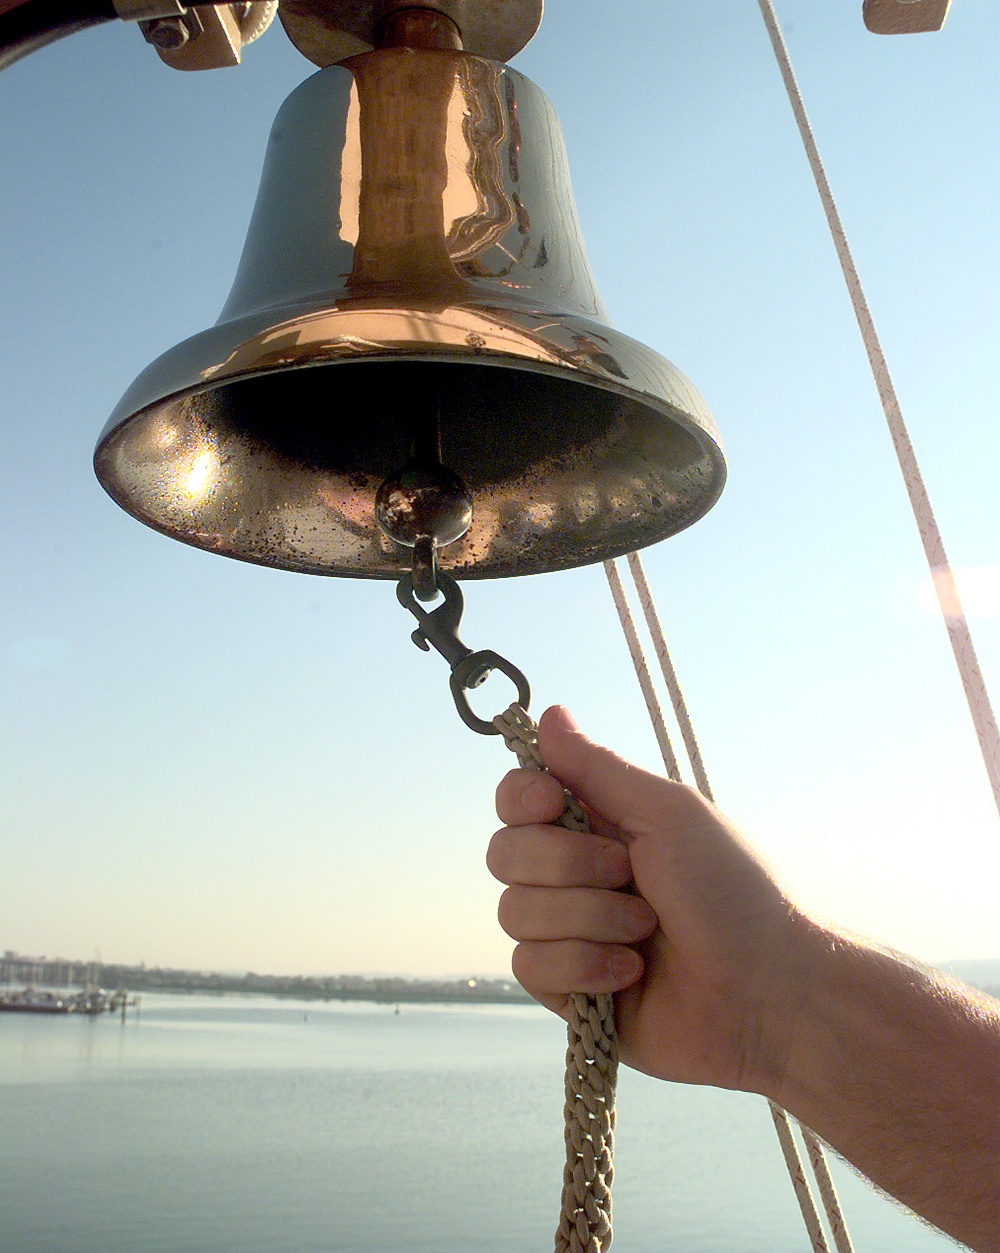 Ringing the ship's bell